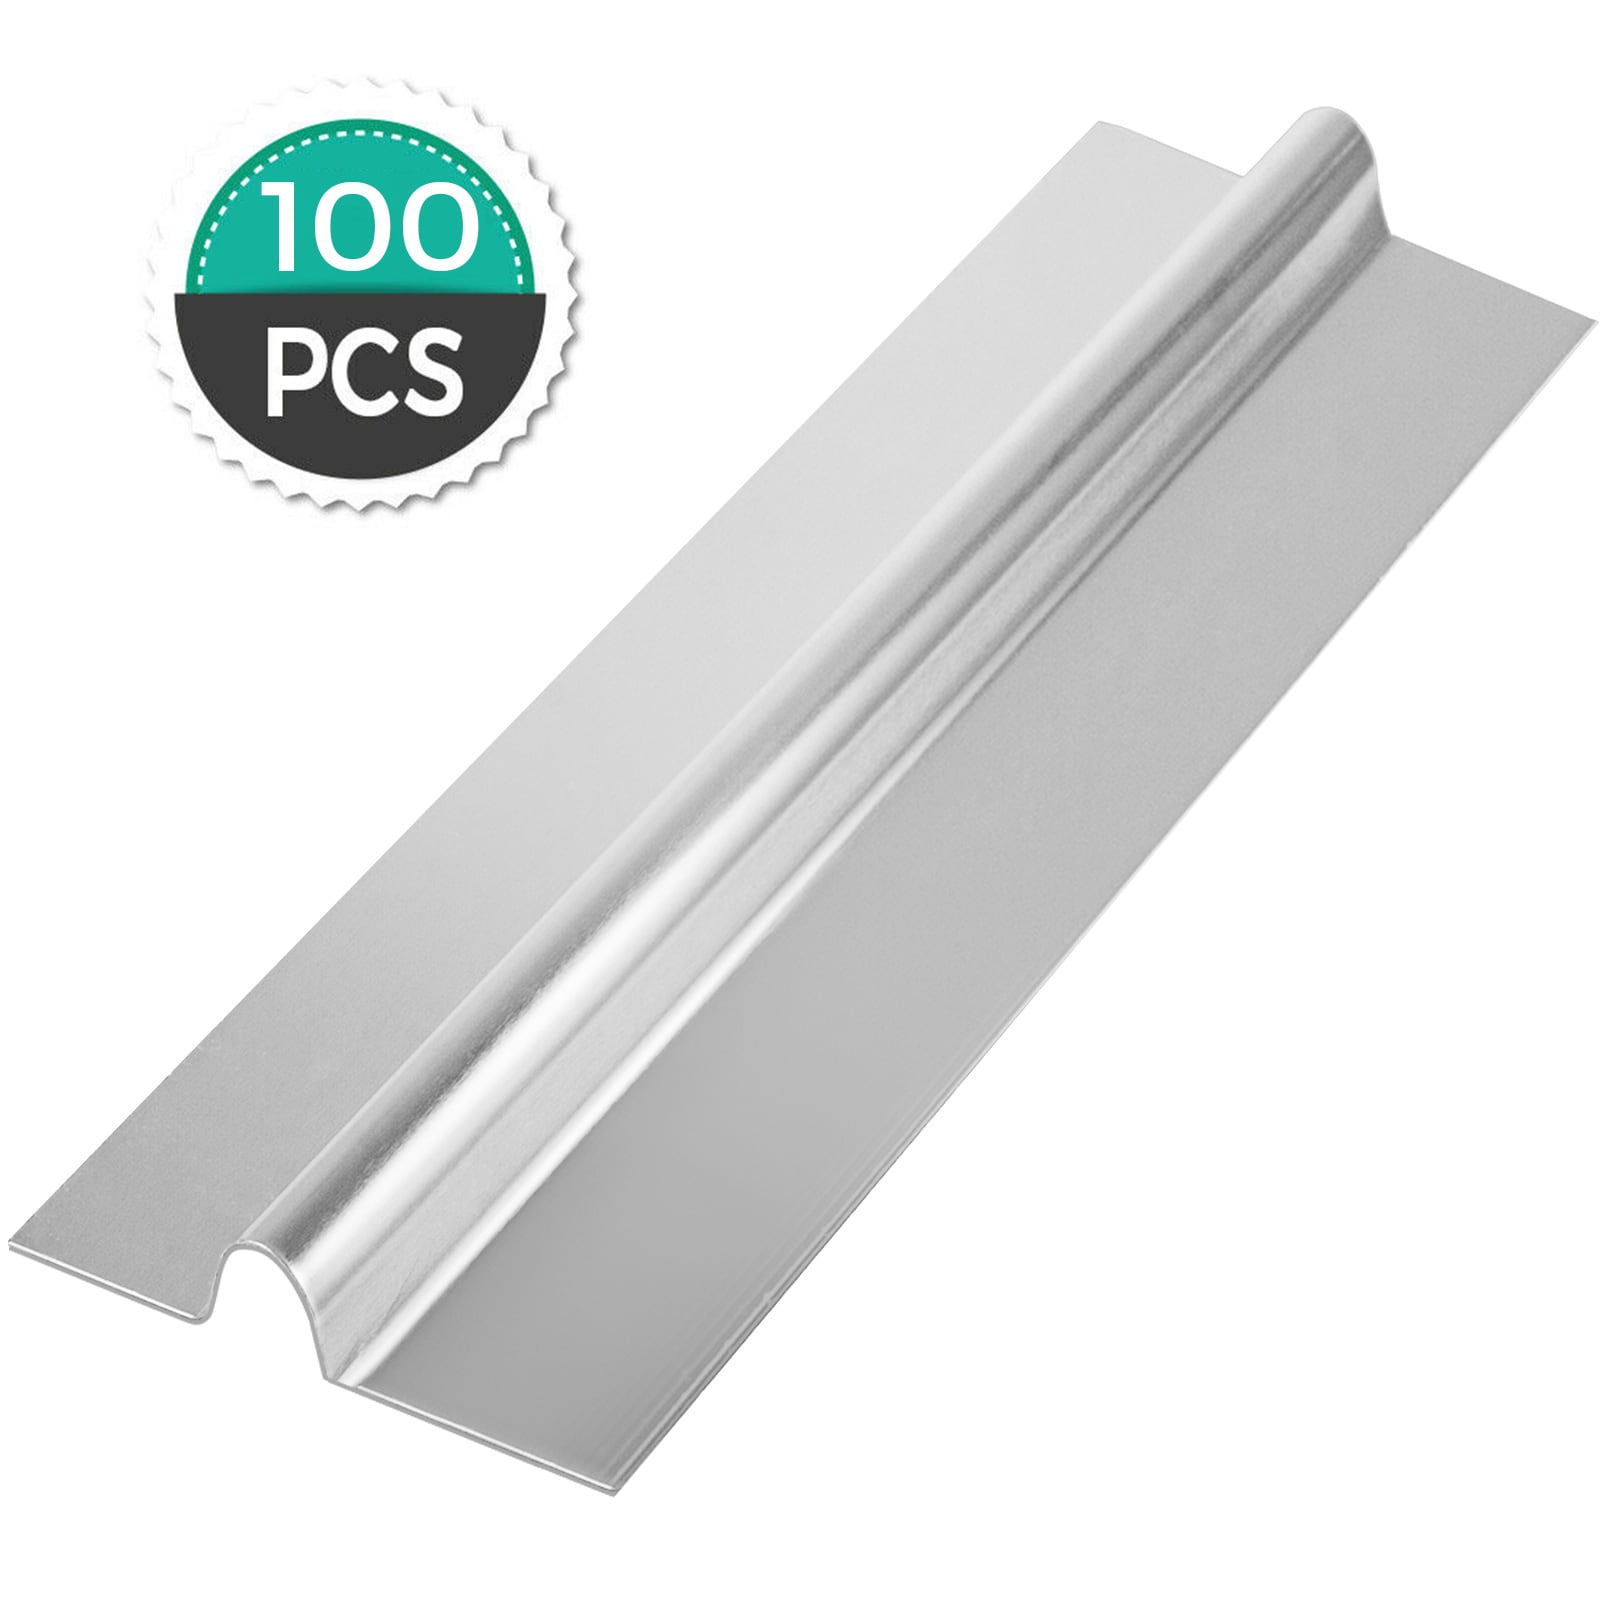 VEVOR Pex Heat Transfer Plates, 100Pcs Box Radiant Heat Transfer Plates,  2Ft Aluminum Pex Heat Transfer Plates, 1/2-in Heat Transfer Plates Designed  For Pex Tubing in the PEX Pipe, Fittings & Specialty